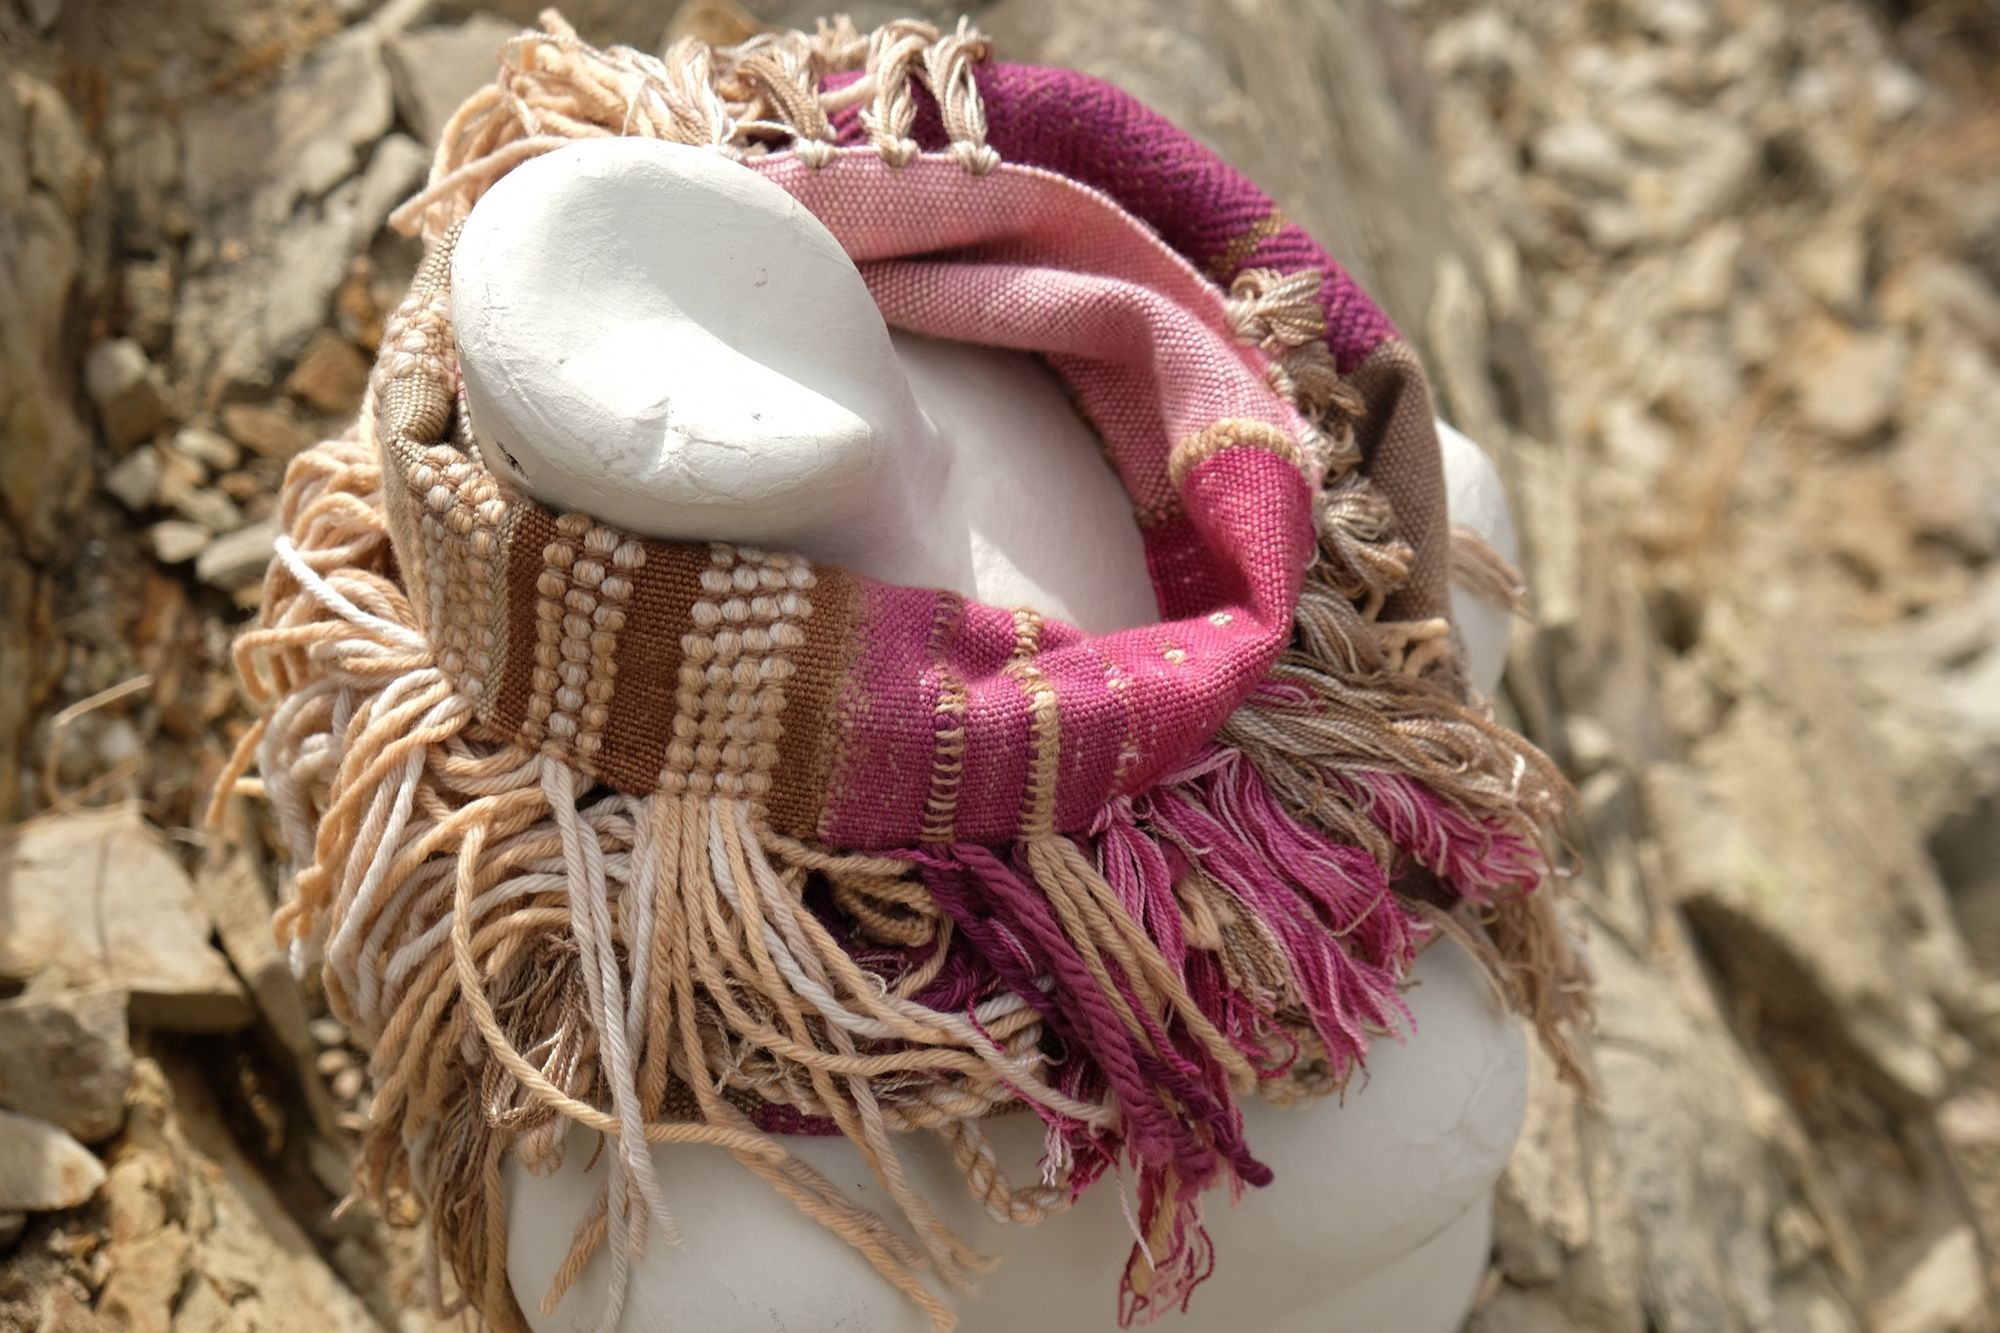 naturally dyed brown, fuchsia and tan fringed infinity scarf on a white mannequin bust in the desert